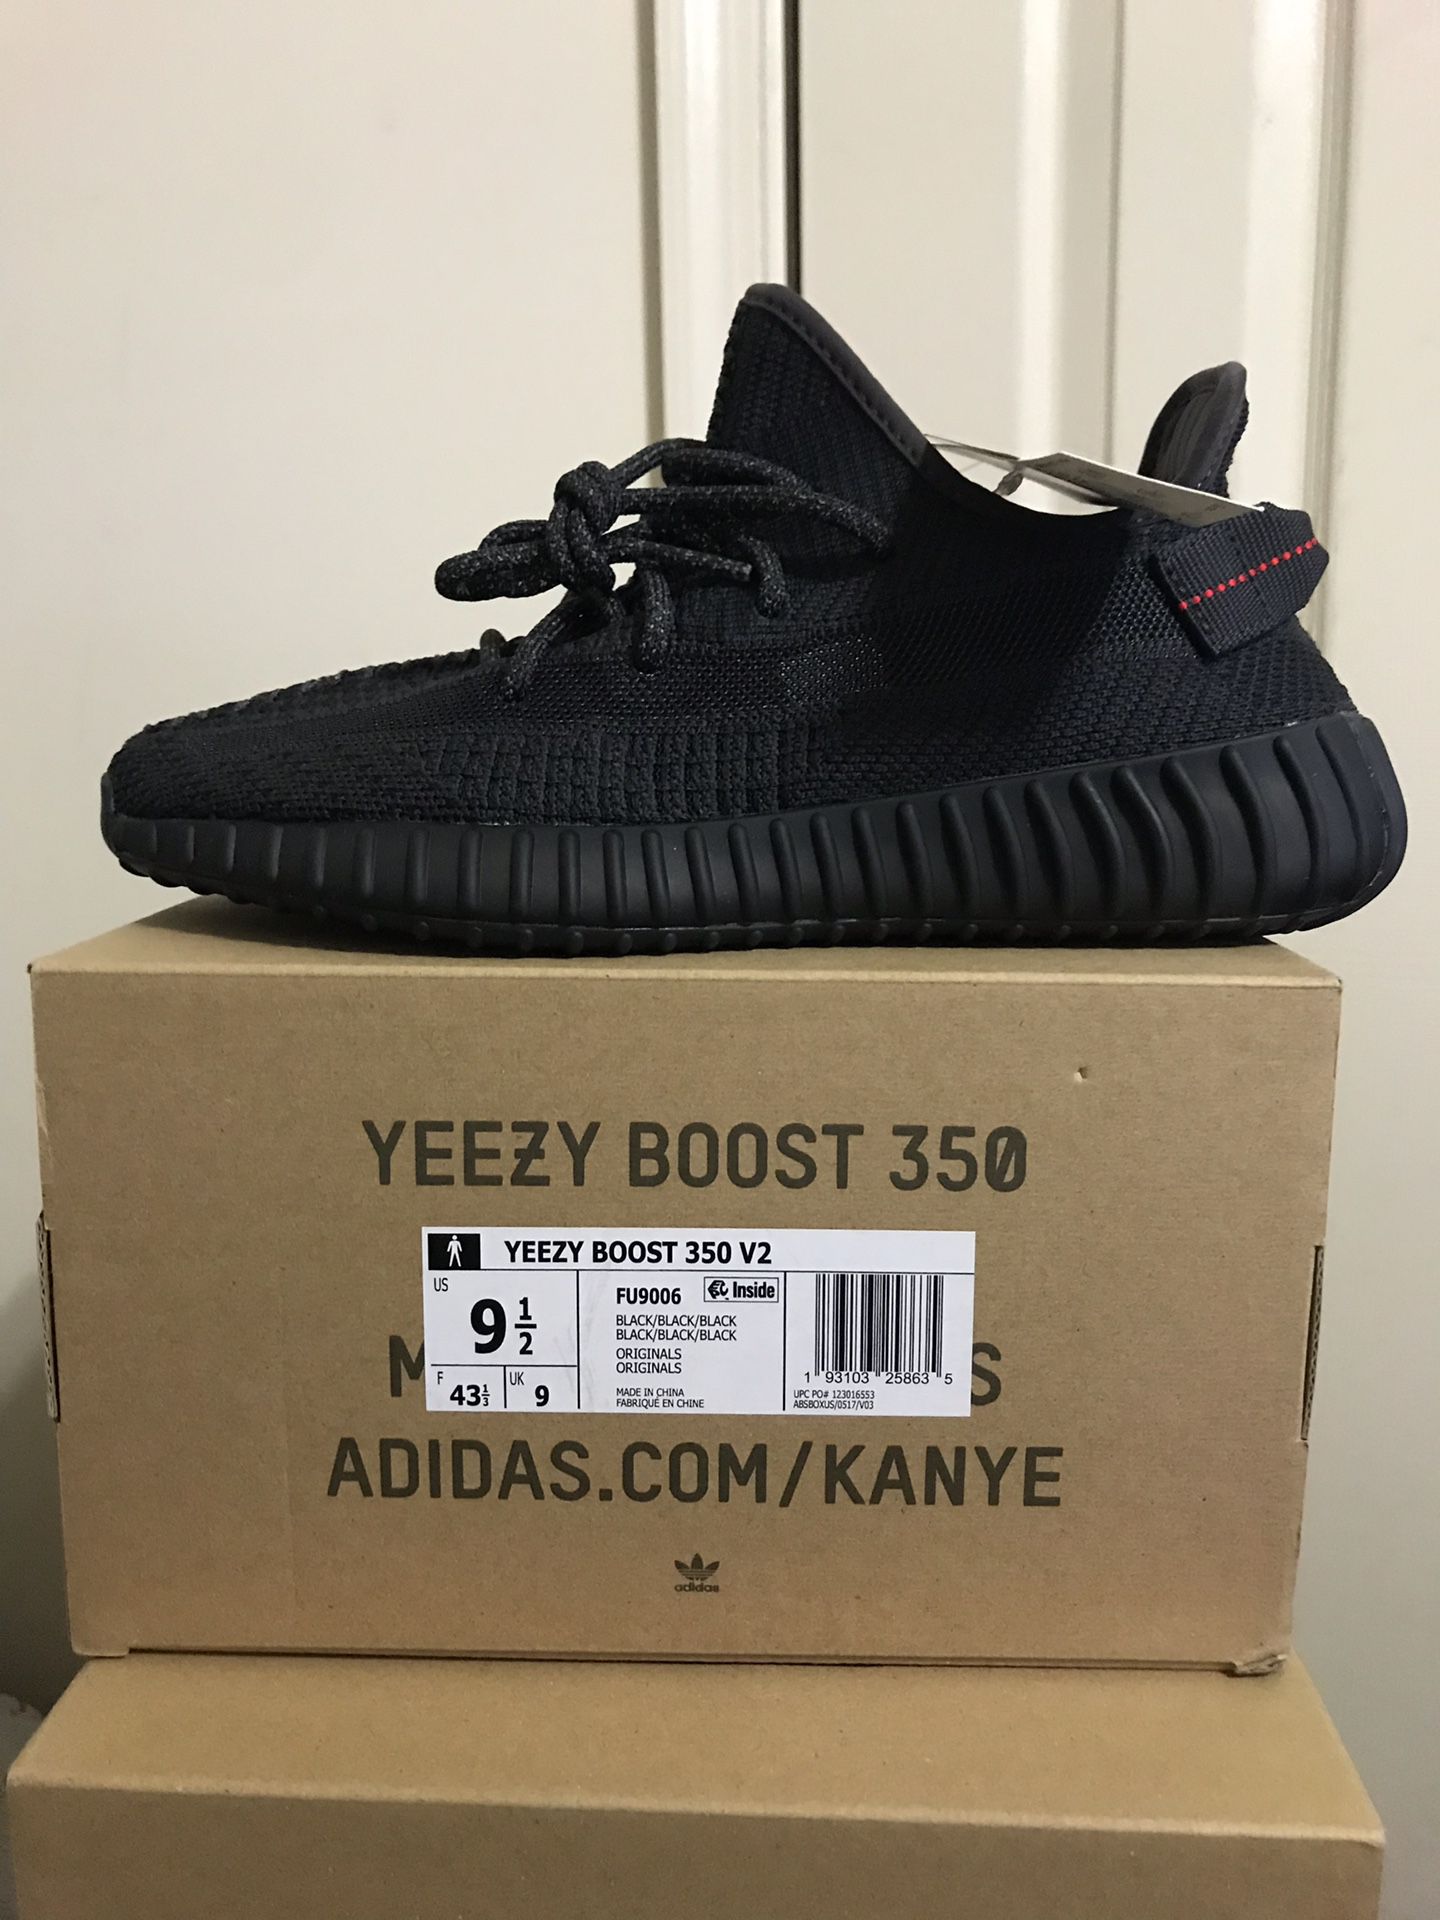 NEW ADIDAS YEEZY BOOST 350 V2 NON REFLECTING SIZE 9.5